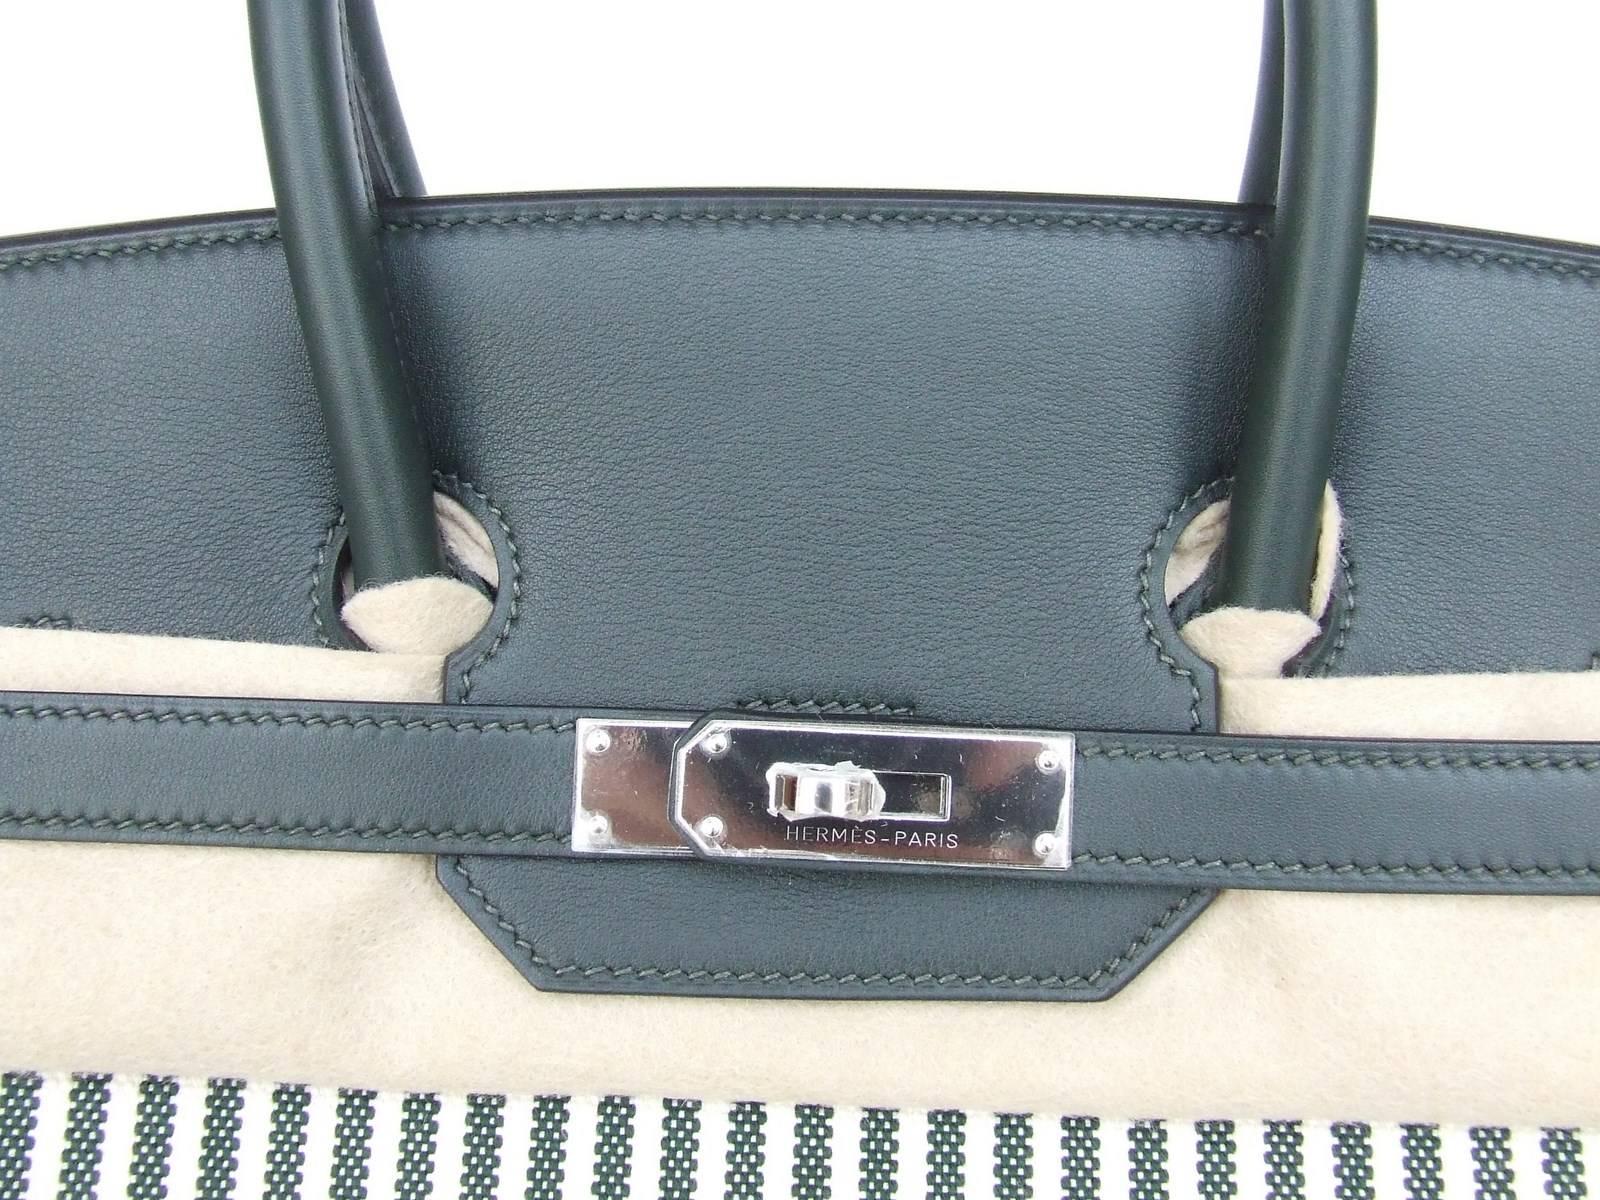 Exceptionnal and rare Authentic Hermes Bag

